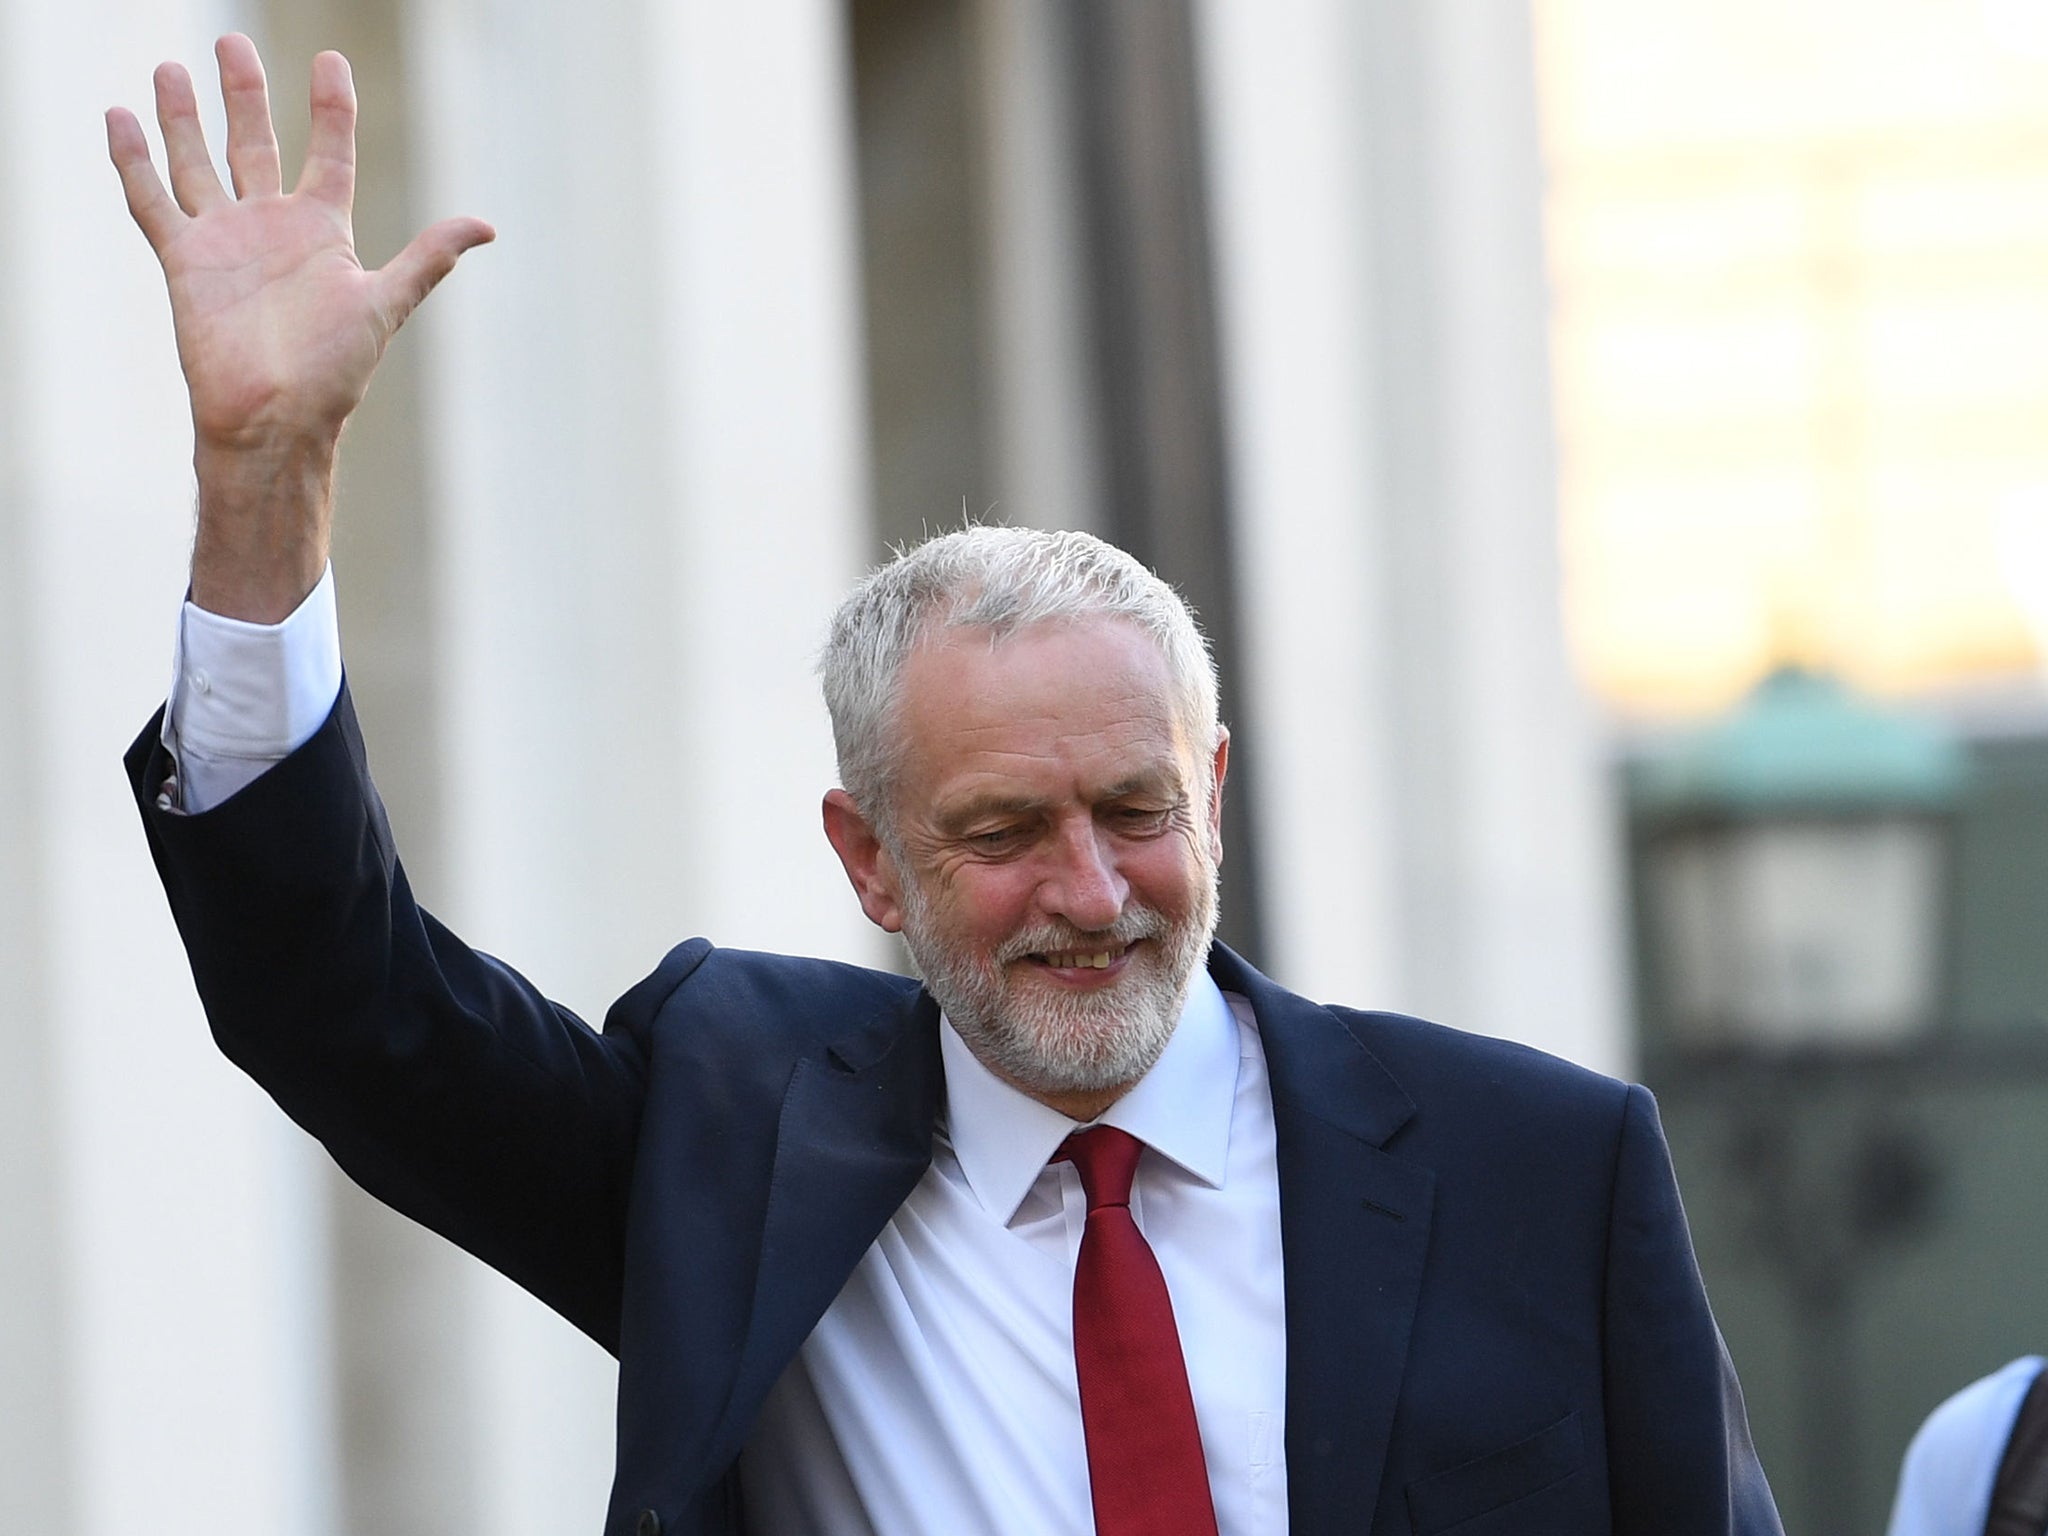 The Labour Party have narrowed the Tories lead in the polls over the past couple of weeks